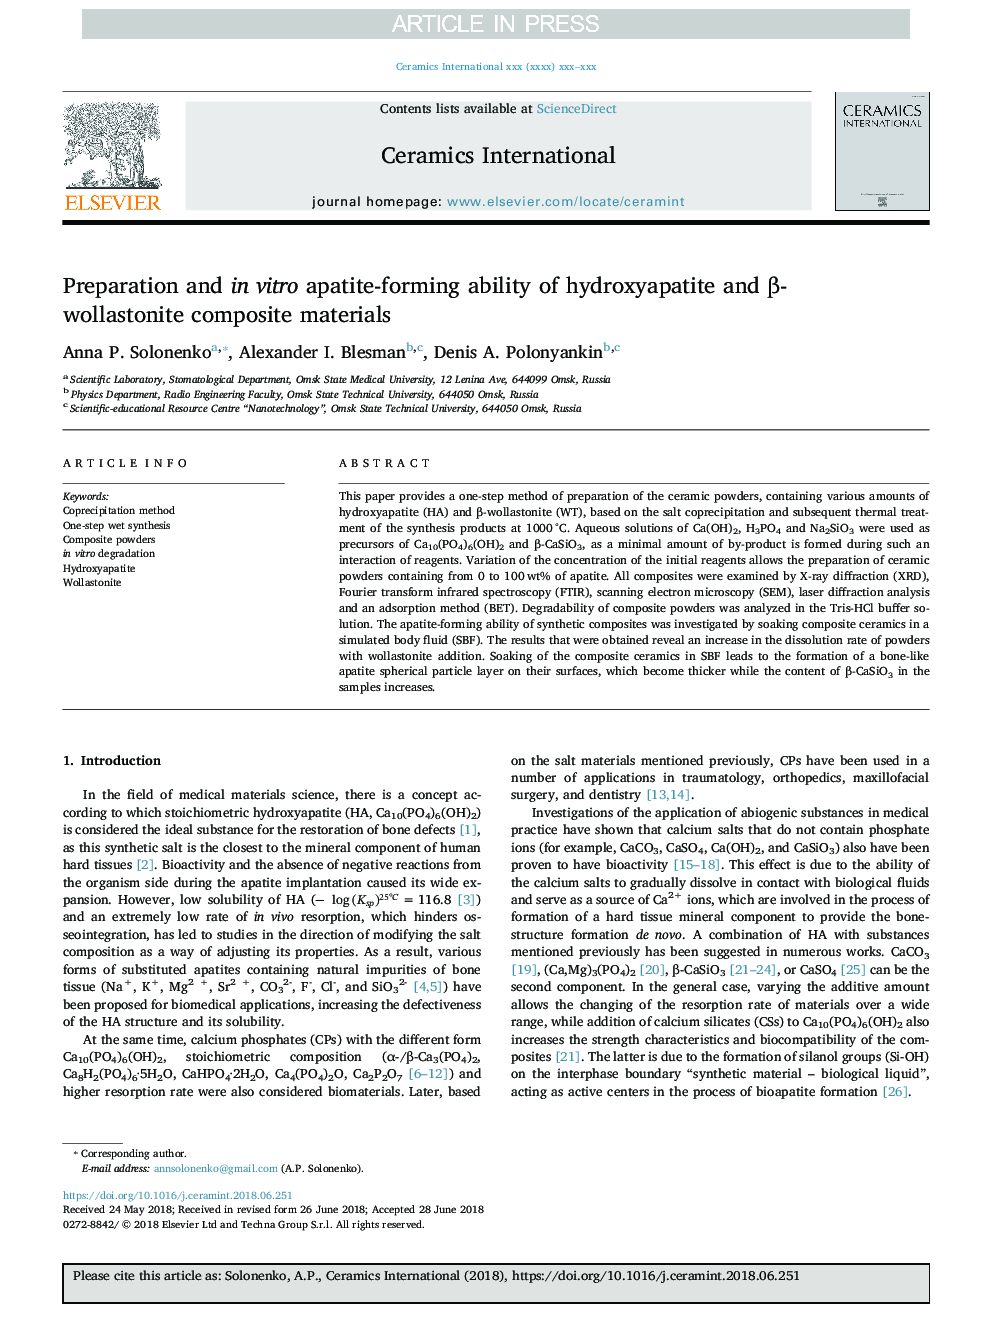 Preparation and in vitro apatite-forming ability of hydroxyapatite and Î²-wollastonite composite materials